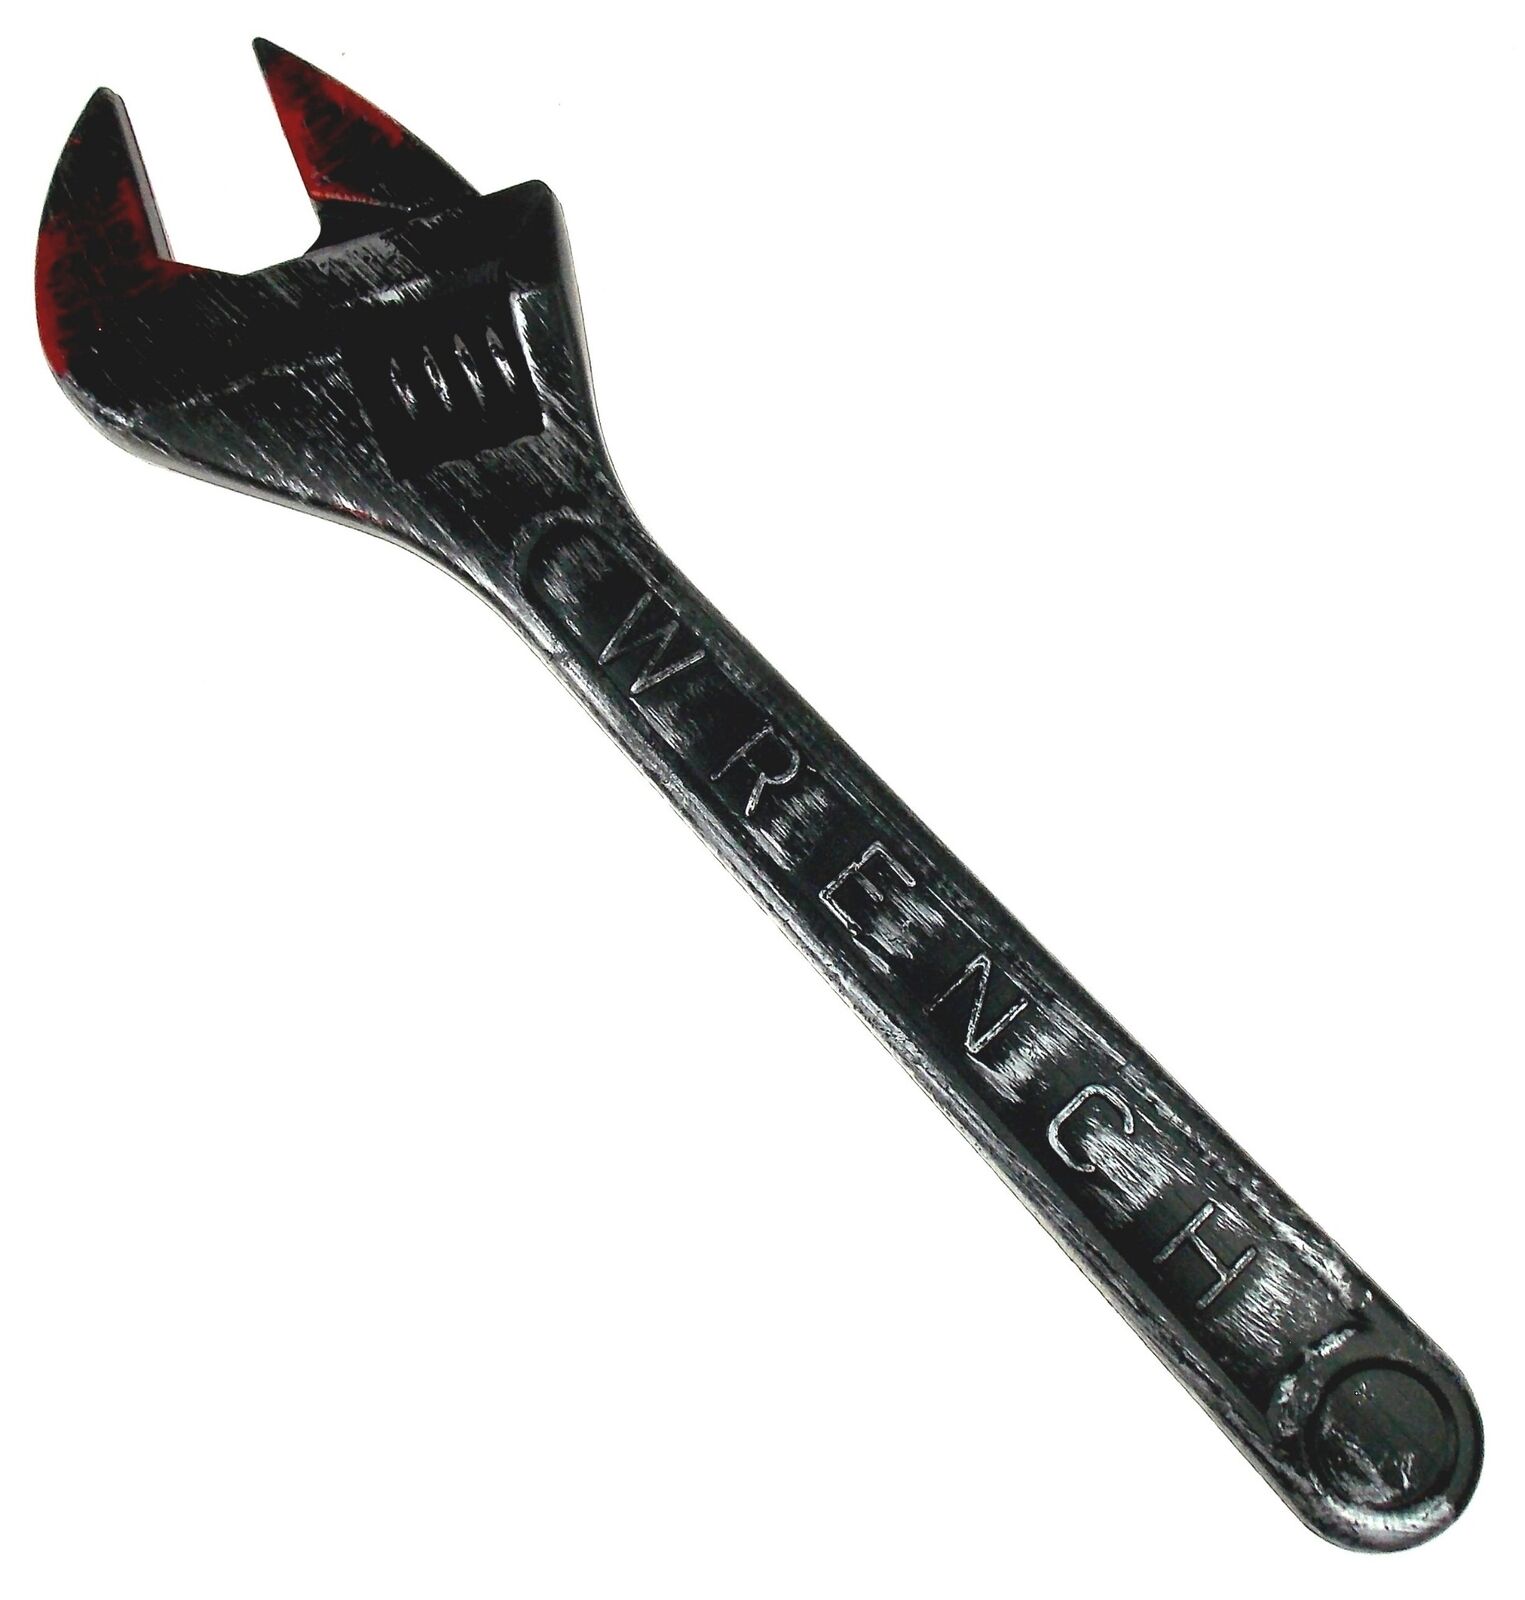 Bloody Wrench Halloween Decor Party Fake Lifesize Costume Horror Prop Prank Gift